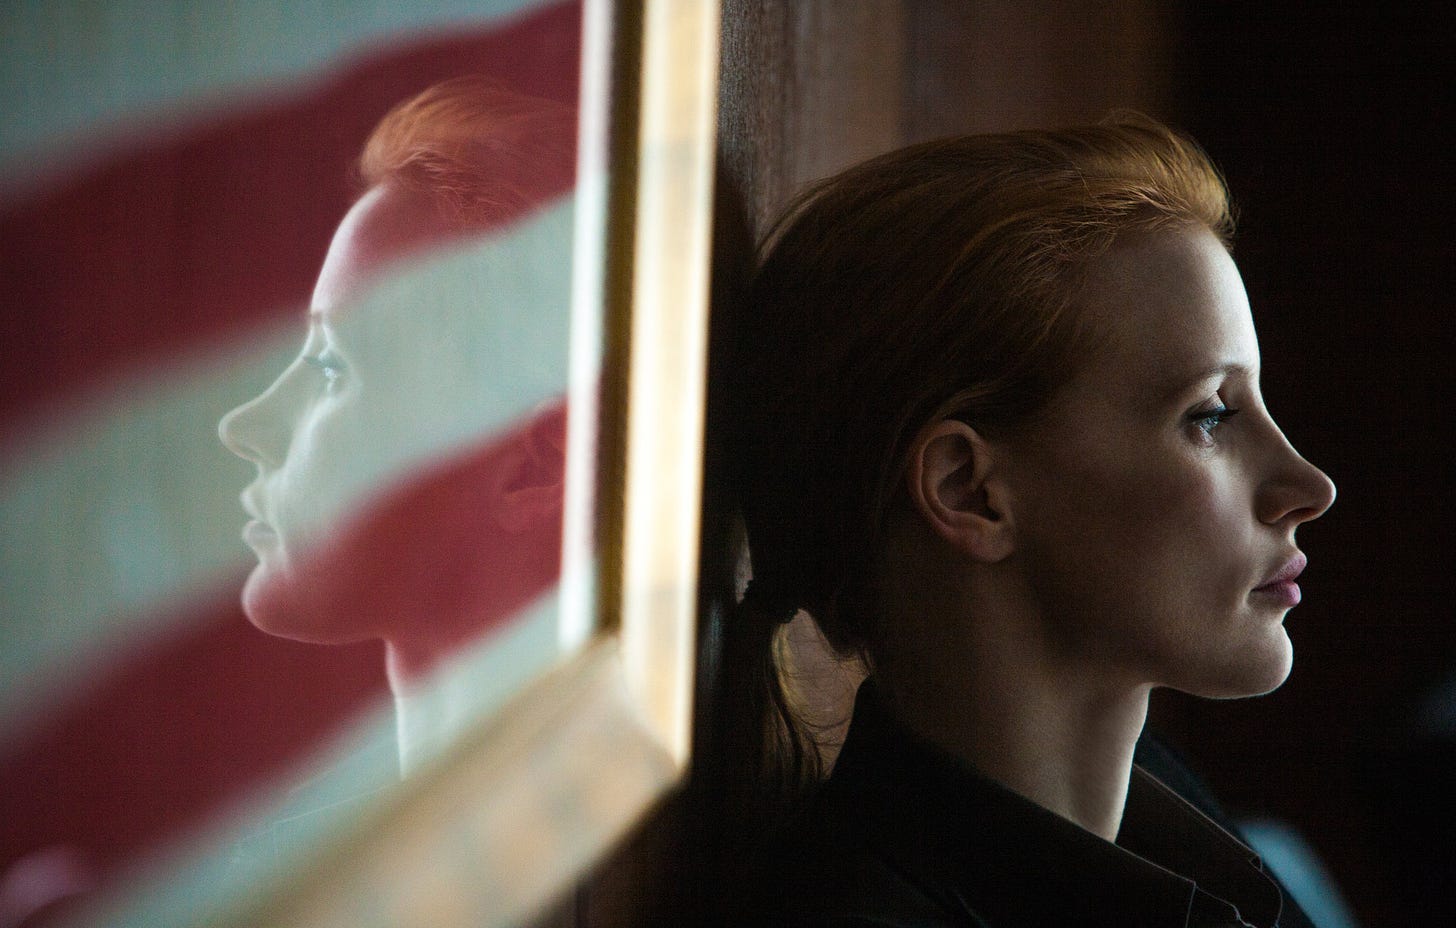 Zero Dark Thirty,' by Kathryn Bigelow, Focuses on Facts - The New York Times